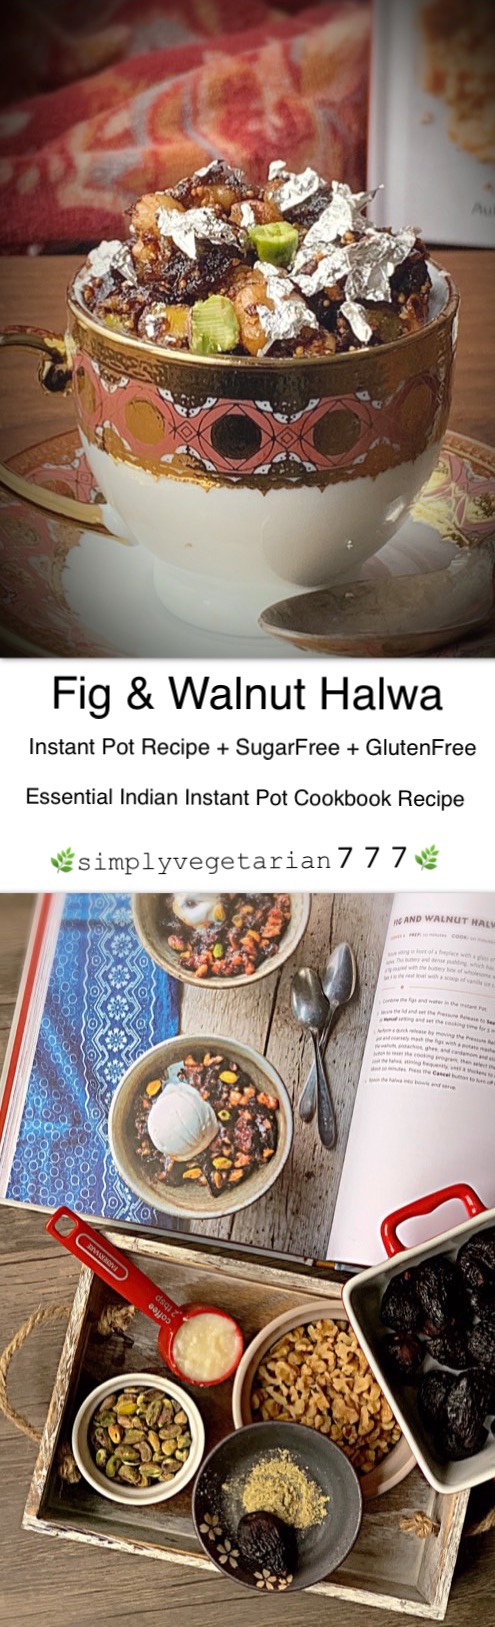 Fig Walnut Halwa is a delicious dessert made in Instant Pot. It is a simple and easy recipe. This halwa is perfect for celebrating any occasion or festival. #fig #walnut #halwa #instantpotdessert #sugarfreedessert #glutenfreedessert